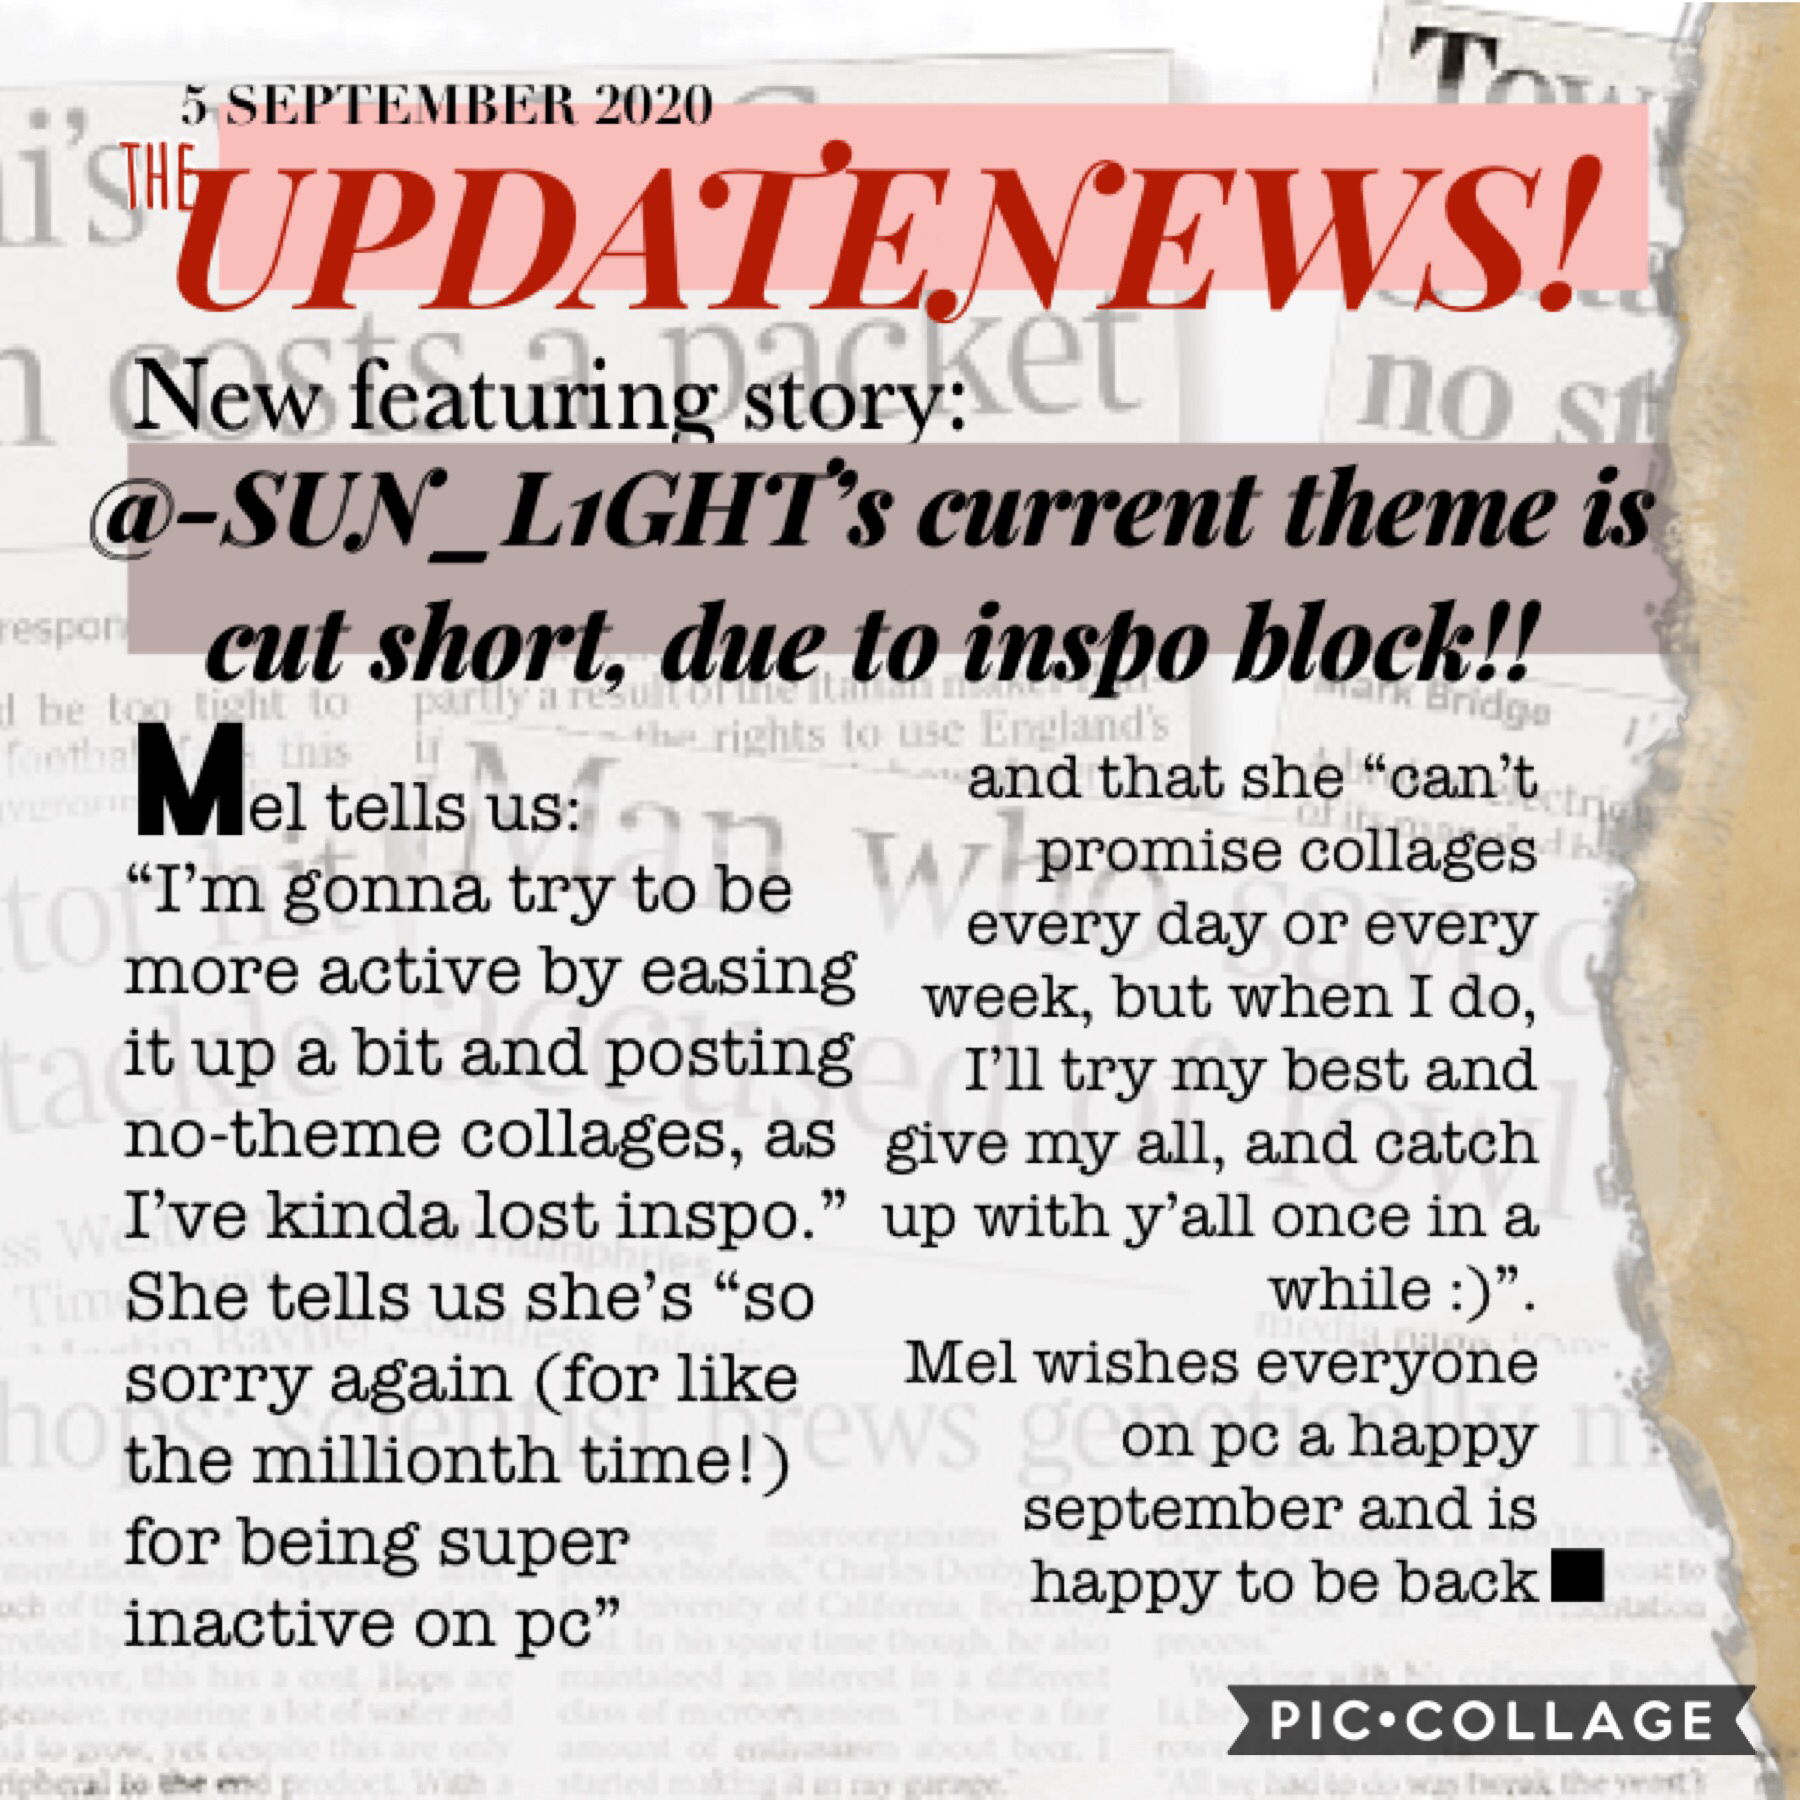 🗞 NEW! 📰 check out the latest update on @-SUN_L1GHT- (me!) on UpdateNews! [5/9/20]
(summary: no theme from now on, hopefully more active, though be flexible ;) and happy september! :D)